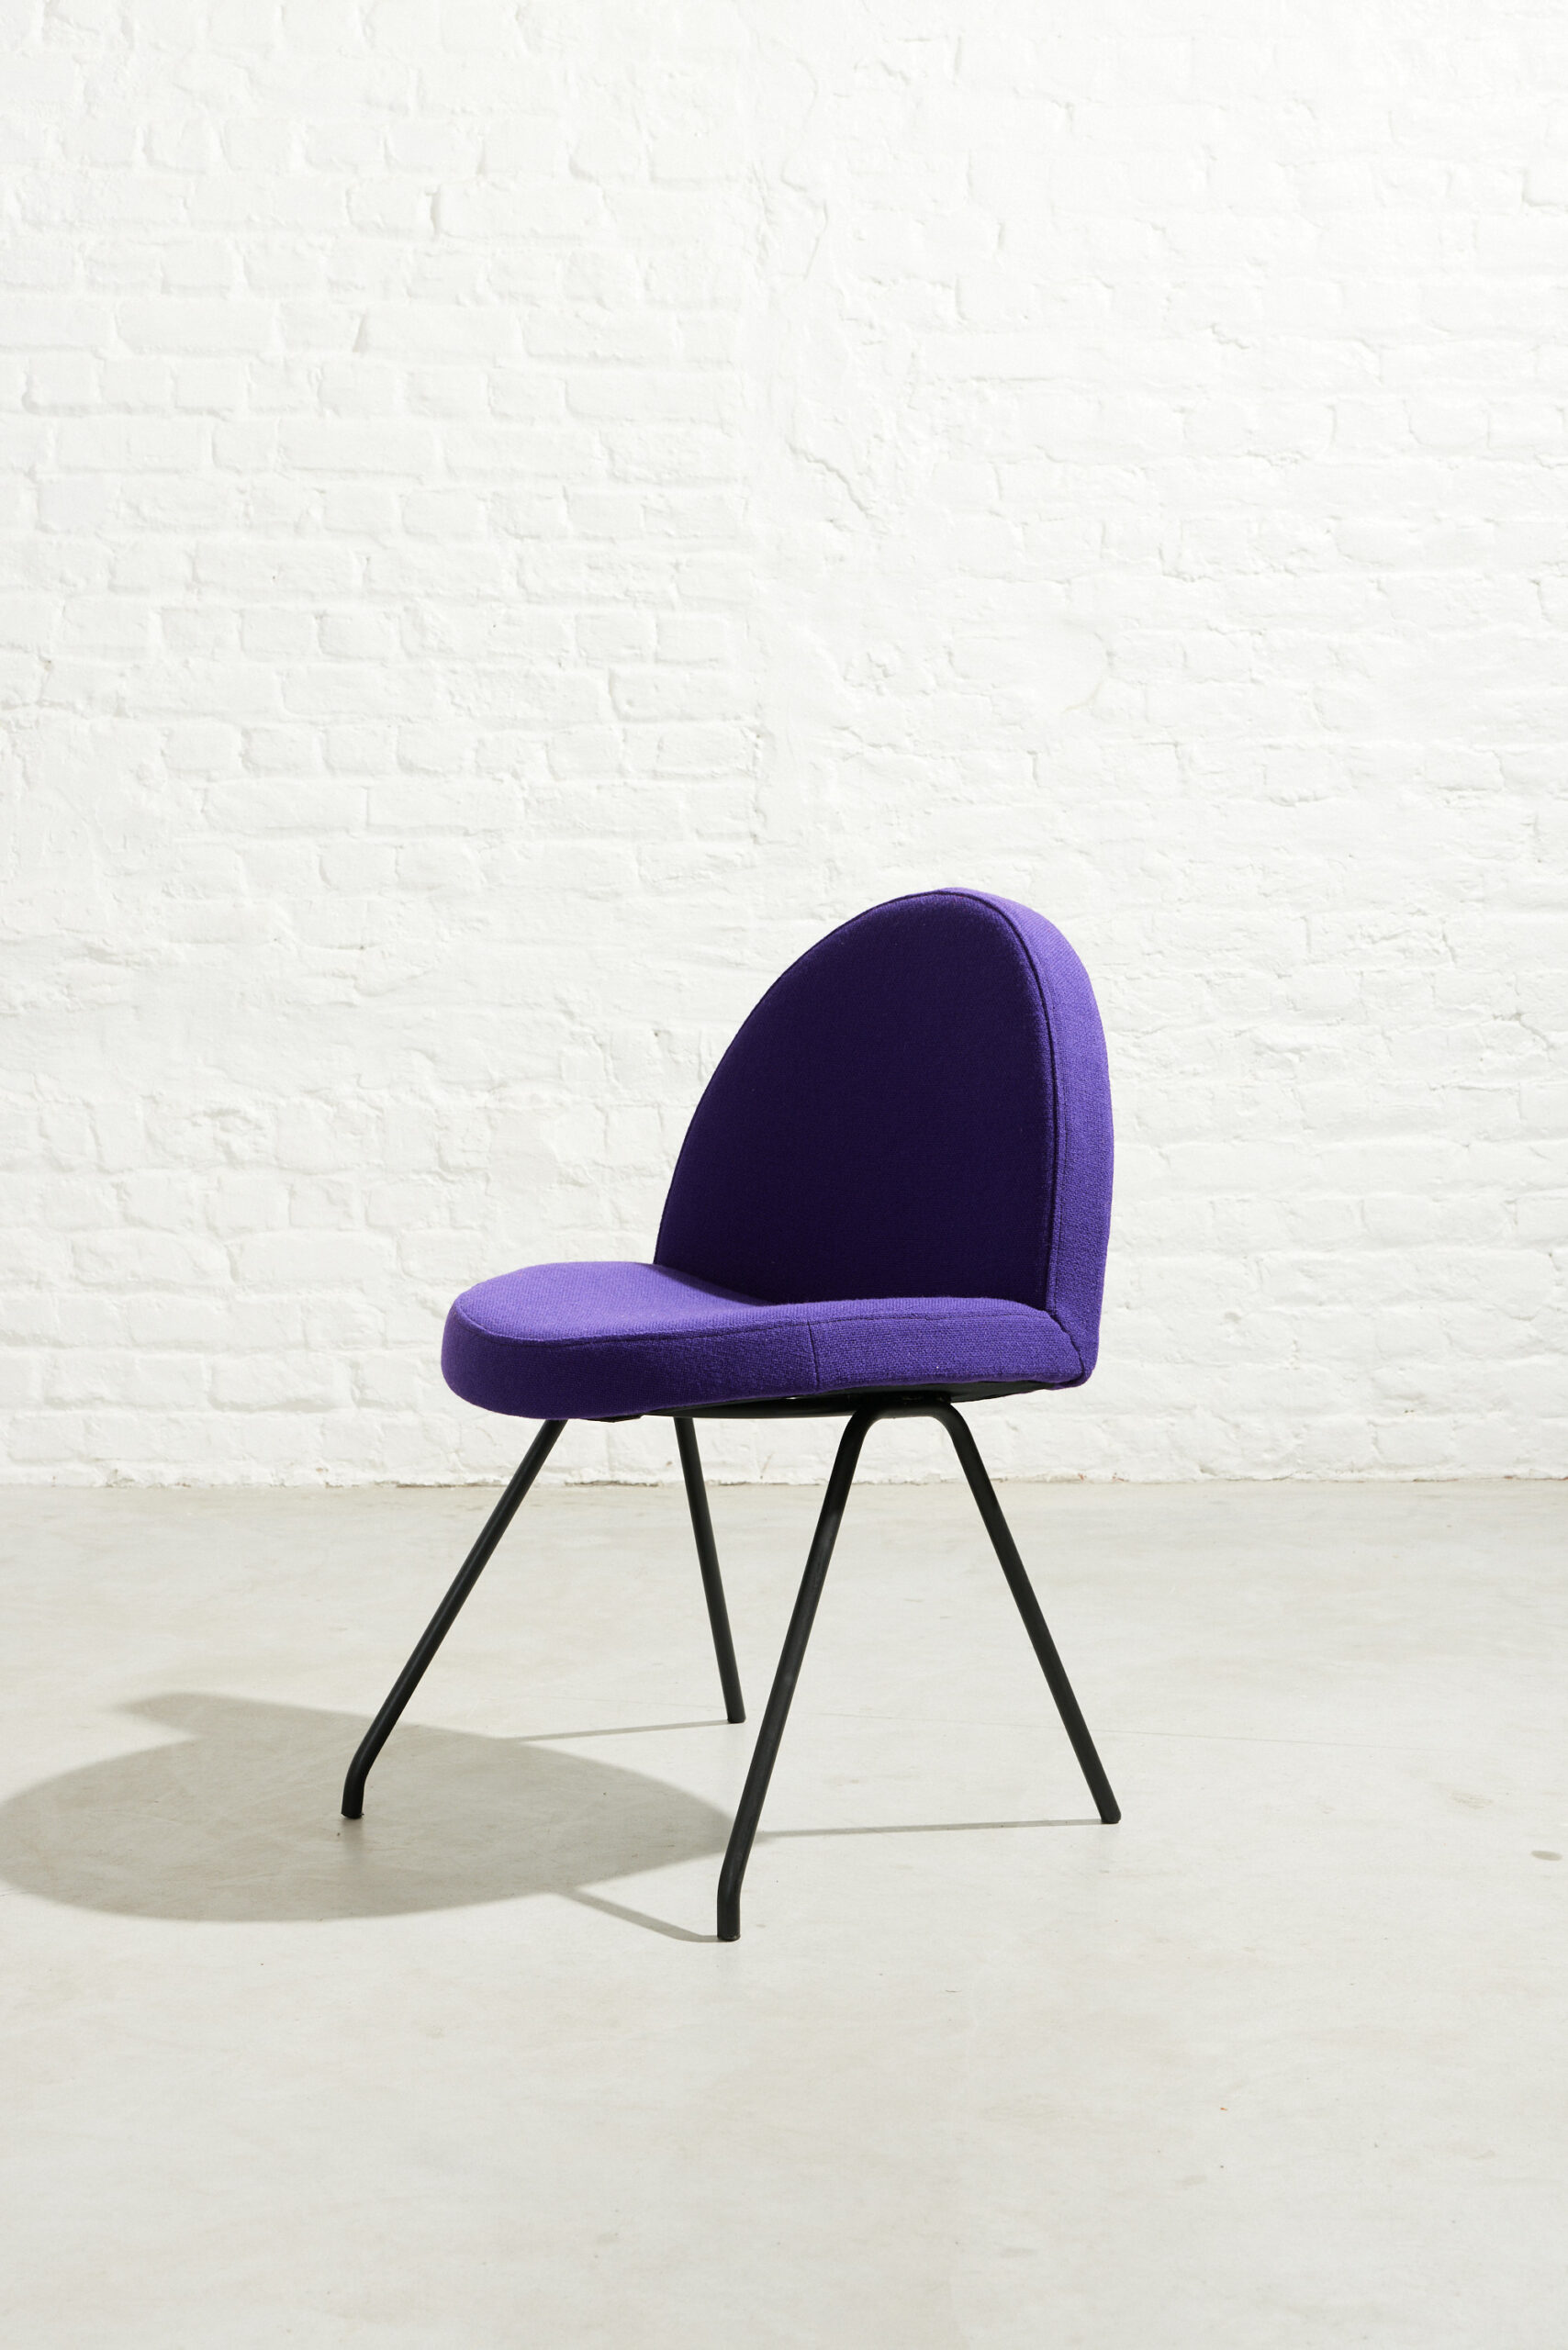 Chair "No.771 or "Tongue by Joseph André Motte